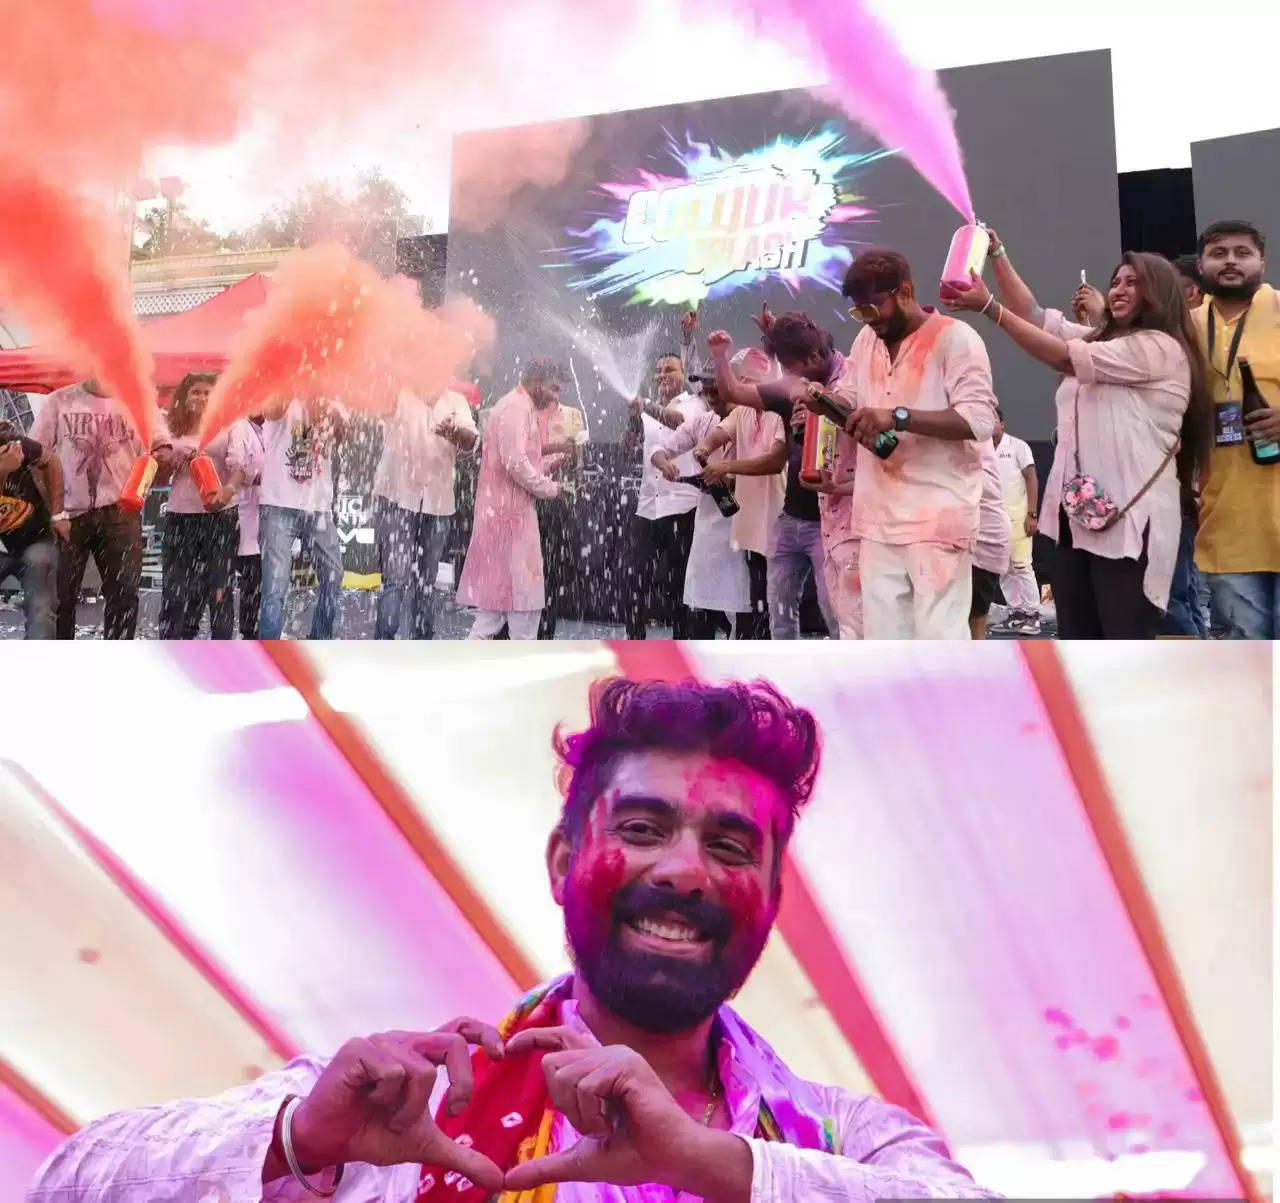 Get ready to celebrate this festival of colours with the stars! Mumbai’s biggest Holi fest - Colour Splash 5 is all set to unveil this Holi